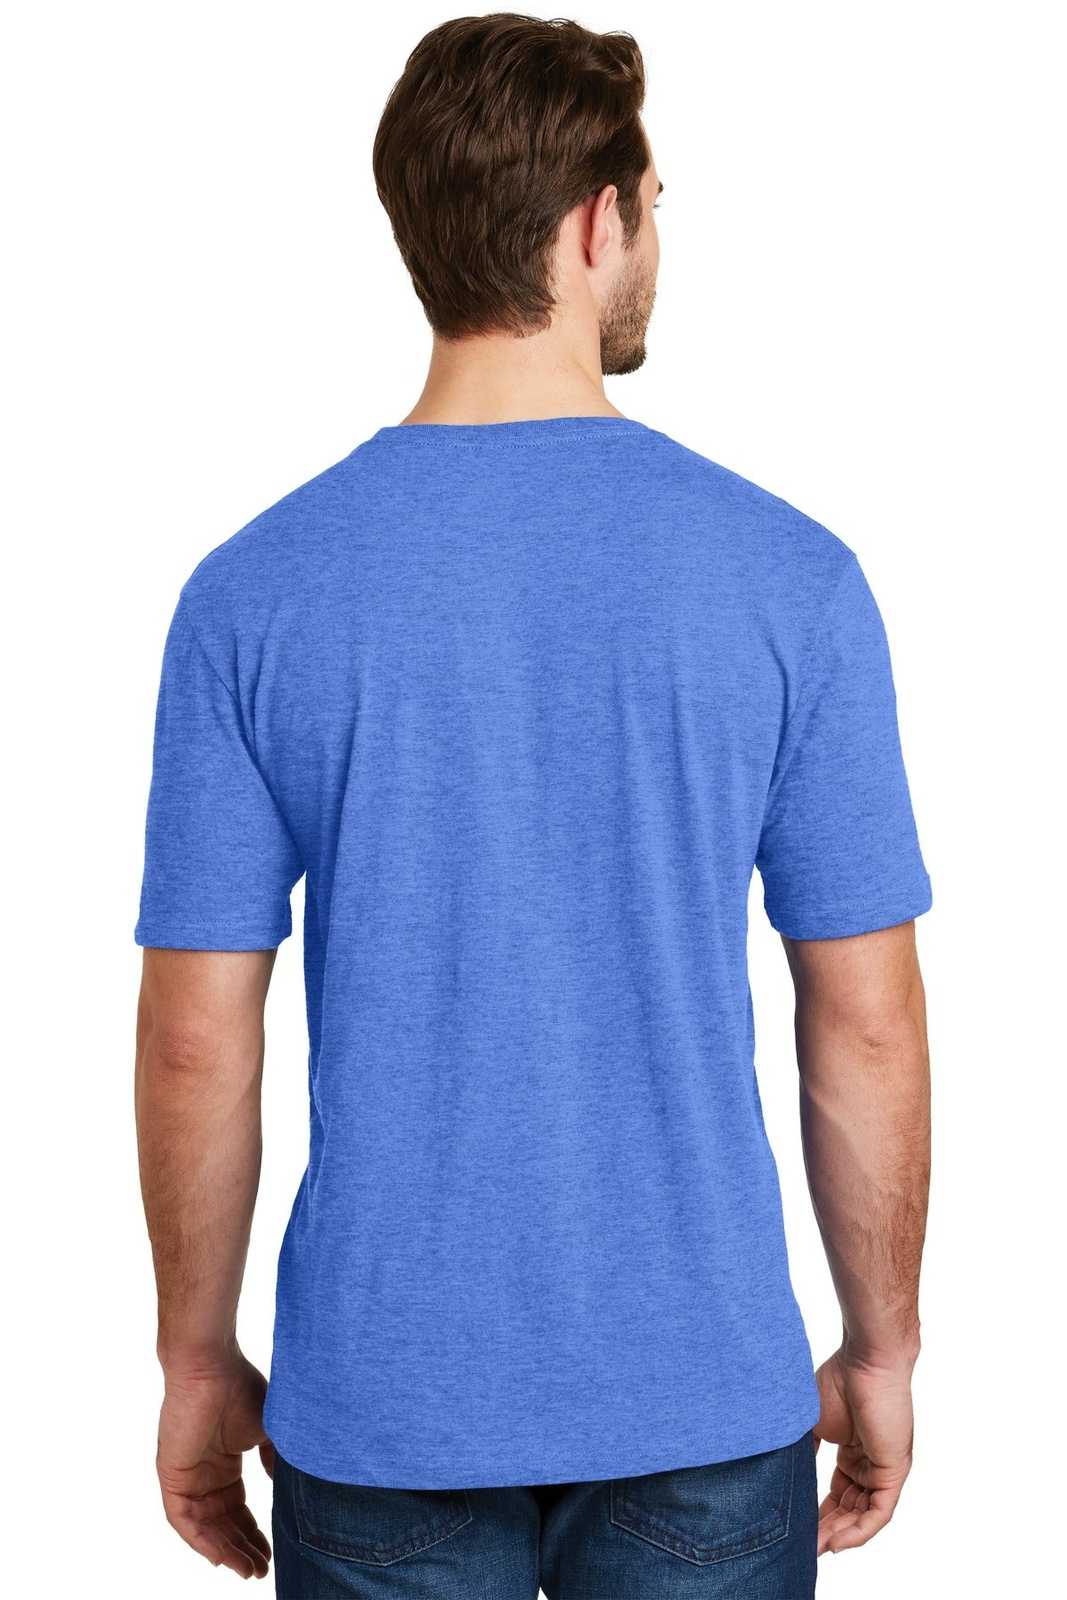 District DM108 Perfect Blend Tee - Heathered Royal - HIT a Double - 2